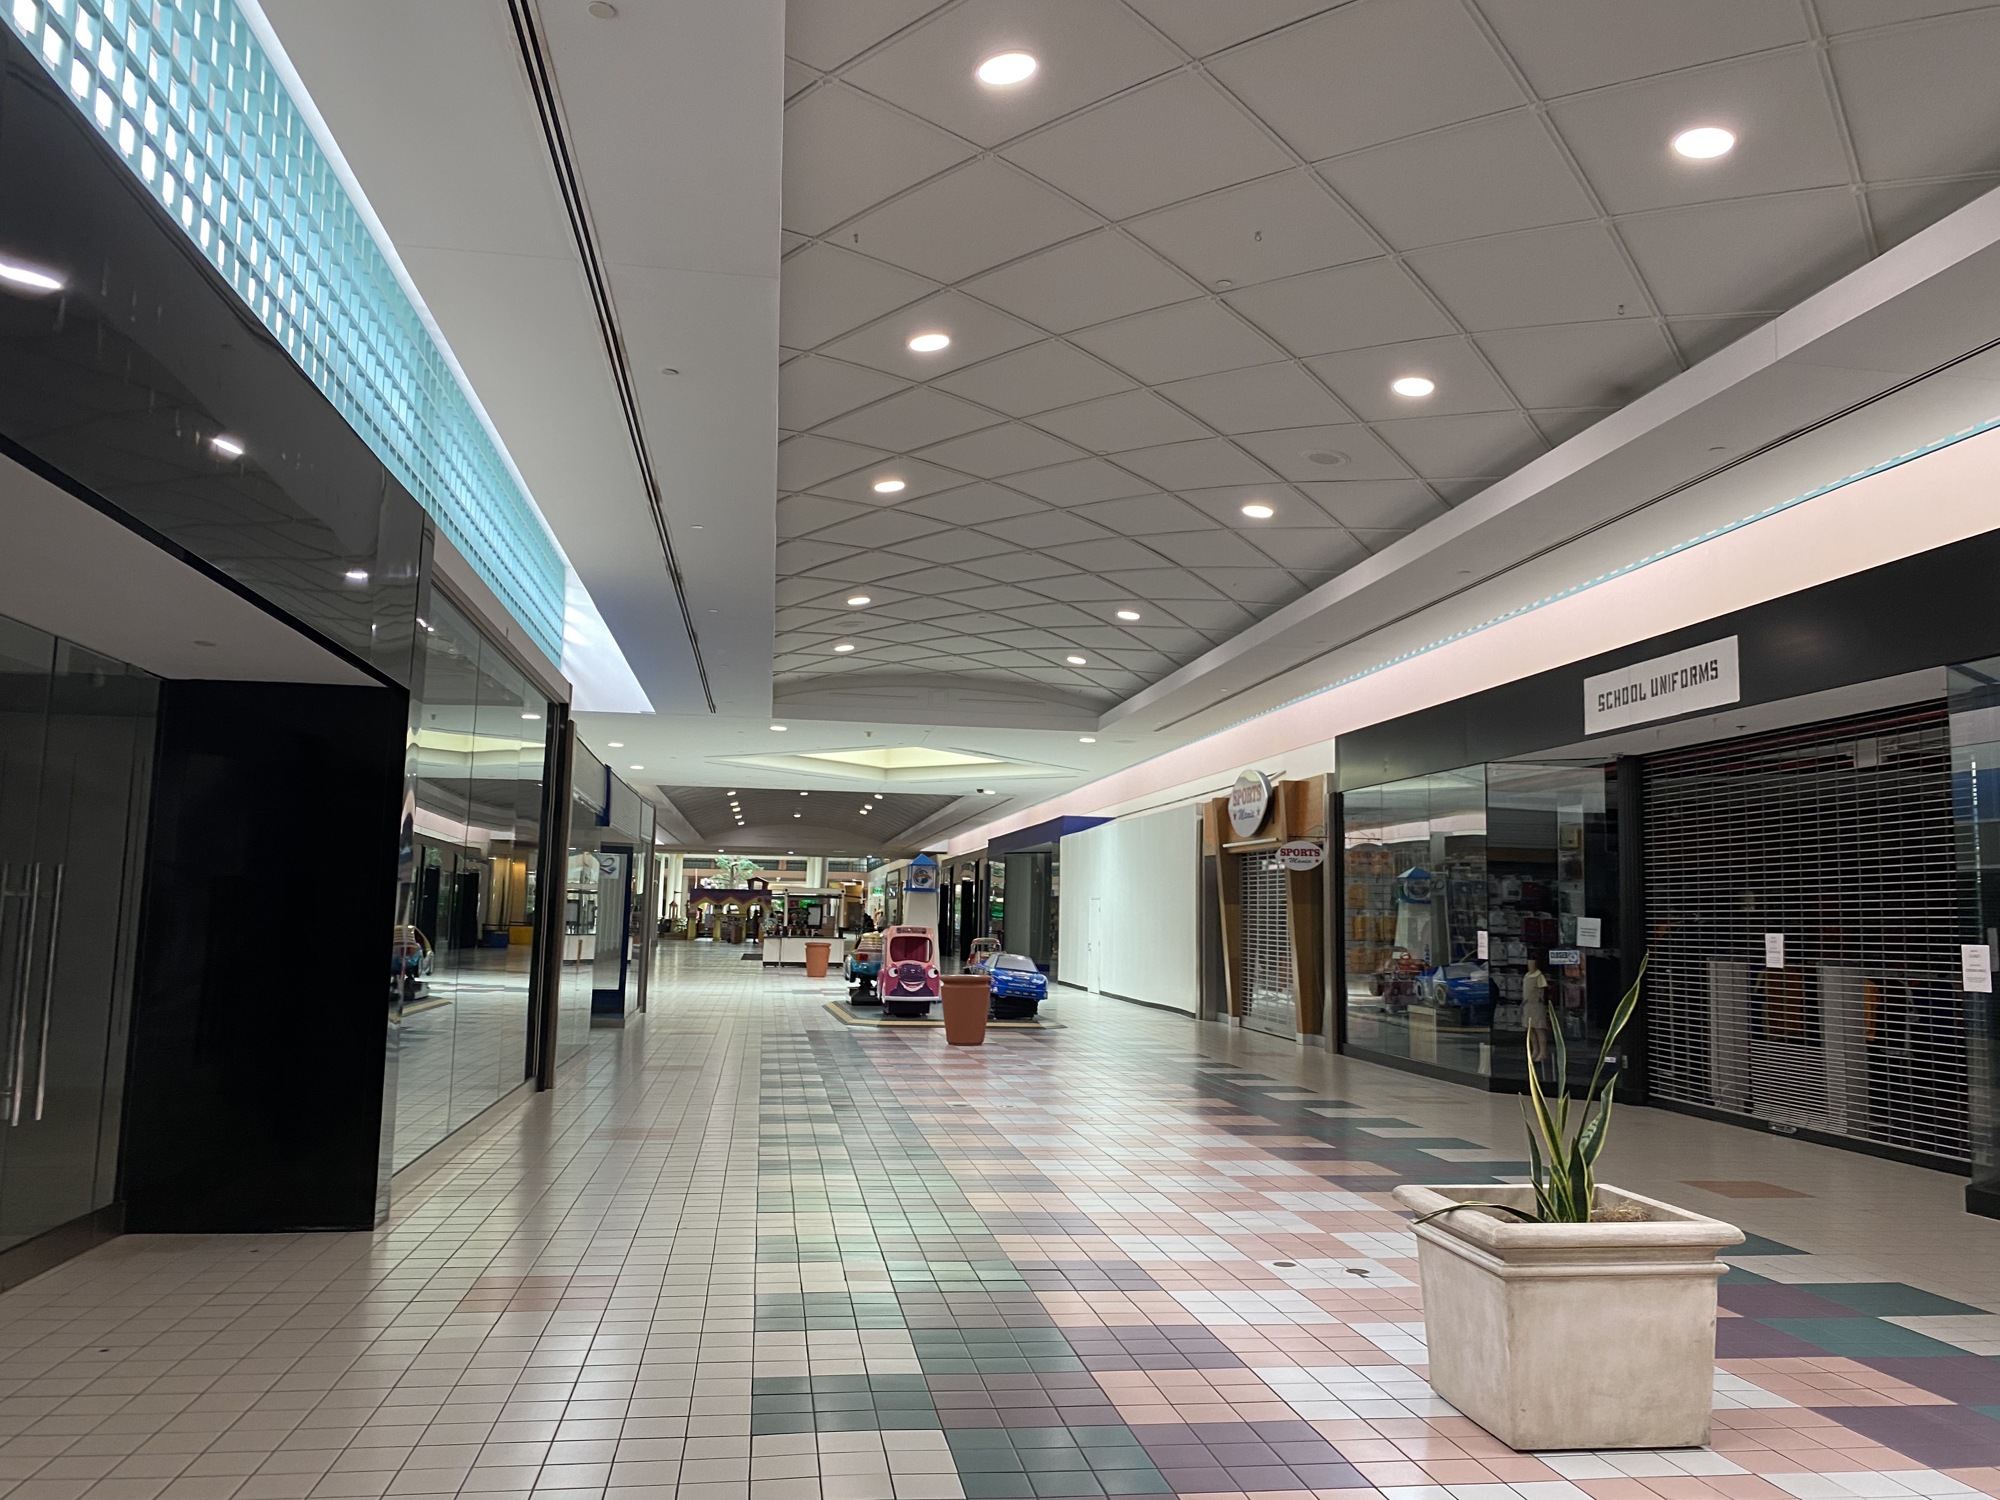 The east wing of Regency Square Mall is 30% occupied. That includes the space held by the J.C. Penney department, which plans to close.